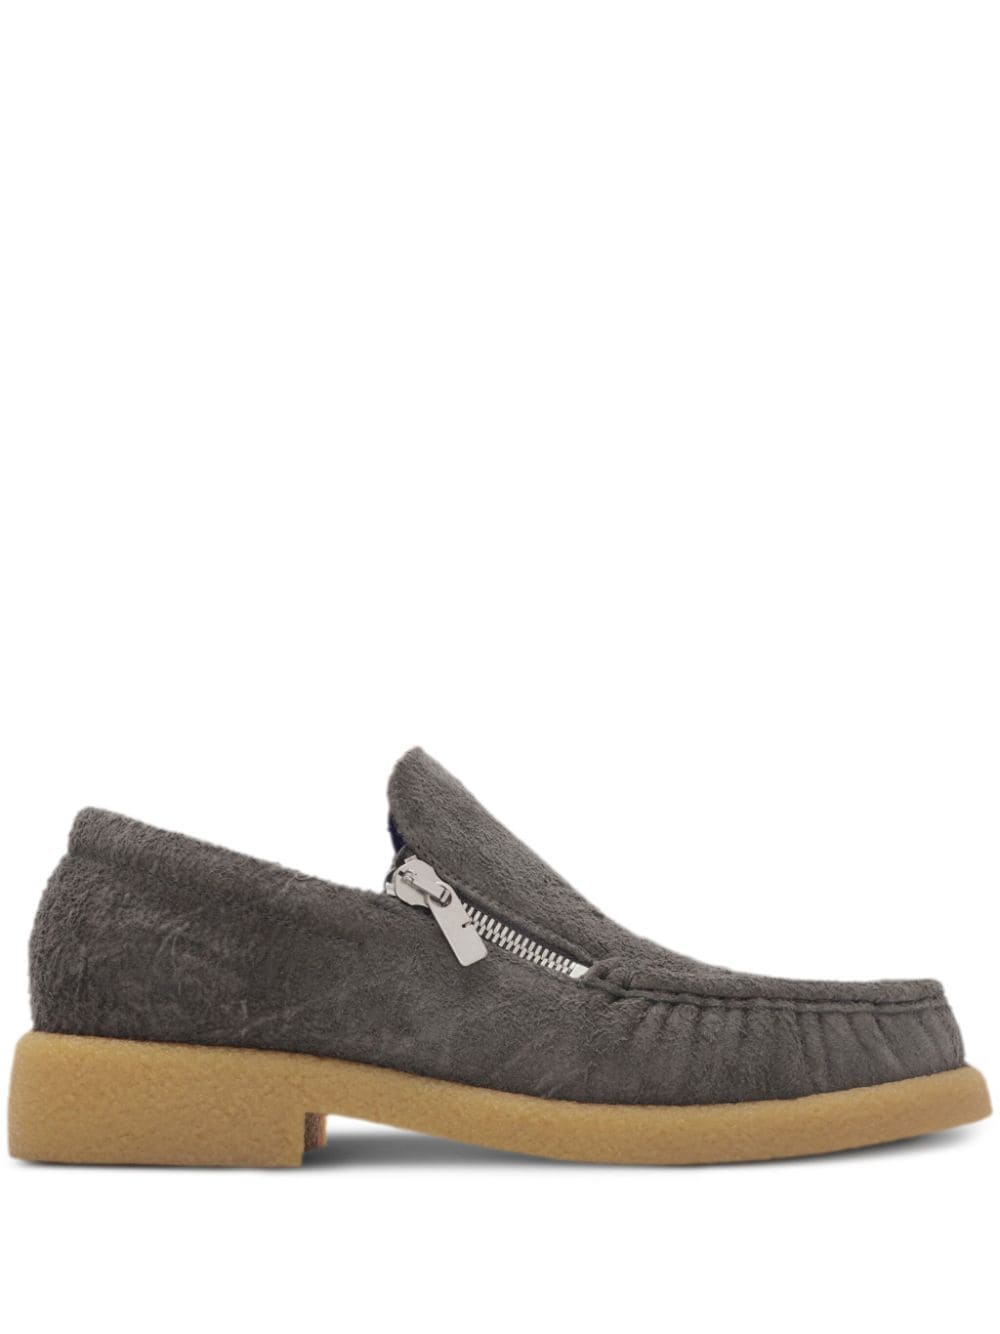 Burberry Chance suede loafers - Grigio